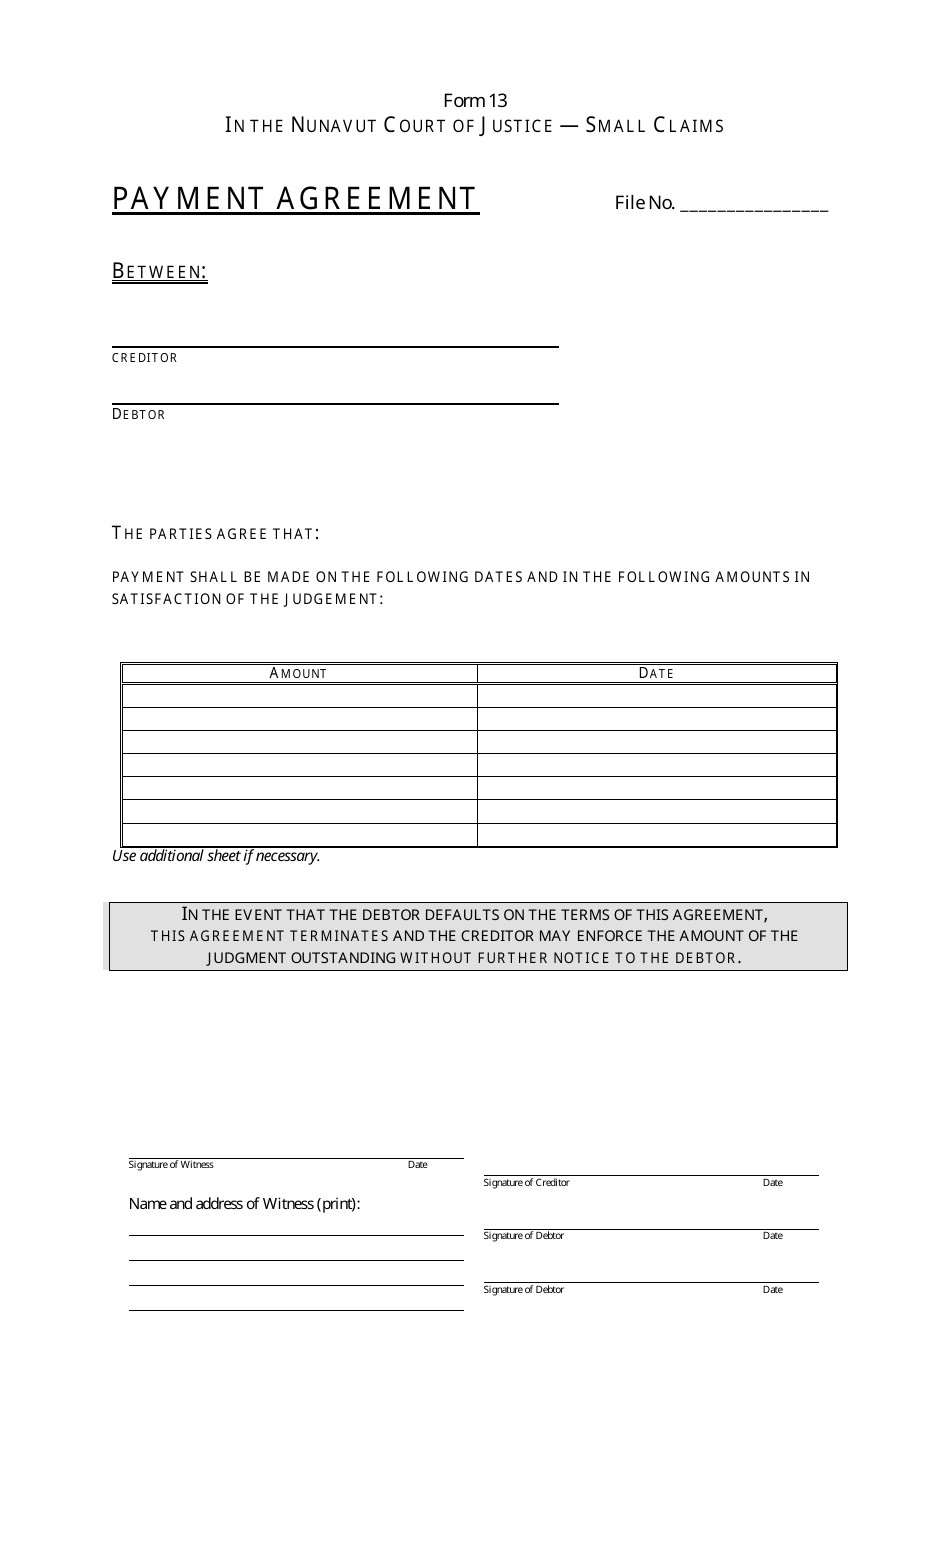 Form 13 Payment Agreement - Nunavut, Canada, Page 1